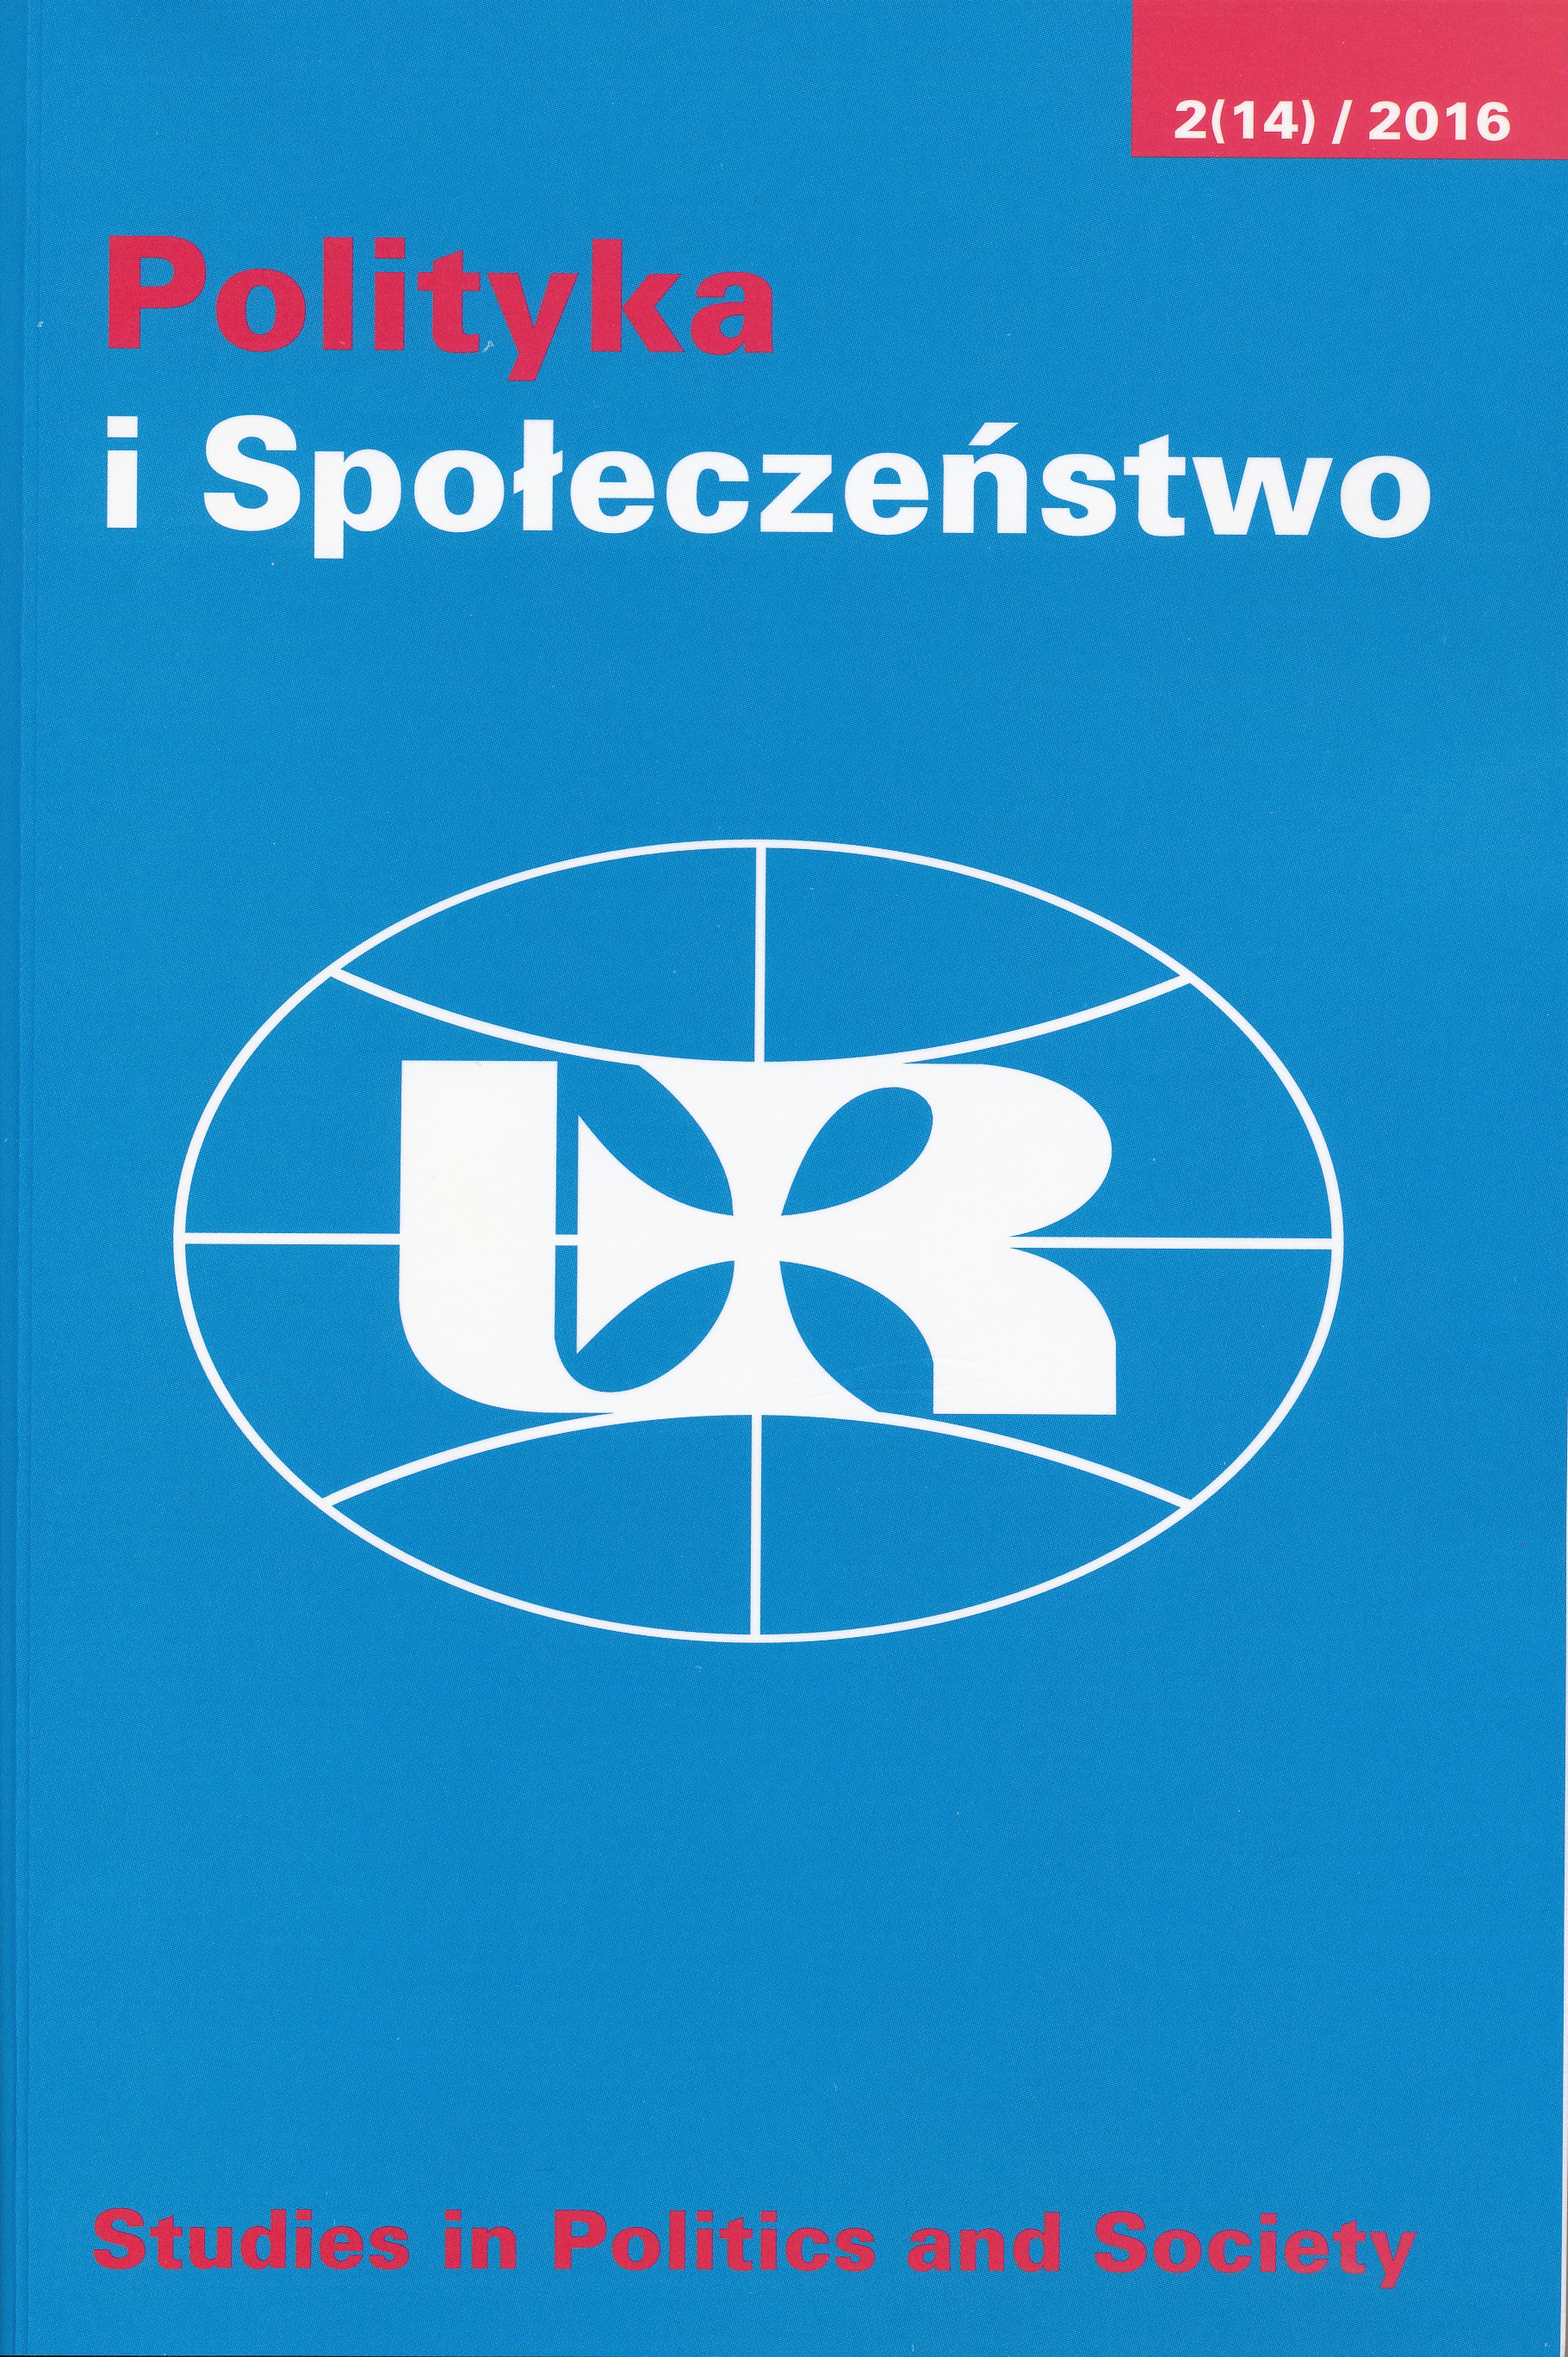 AN OUTLINE OF THE ISSUES OF OFFSET IN THE CONTEXT OF THE DEVELOPMENT OF THE POLISH DEFENSE INDUSTRY Cover Image